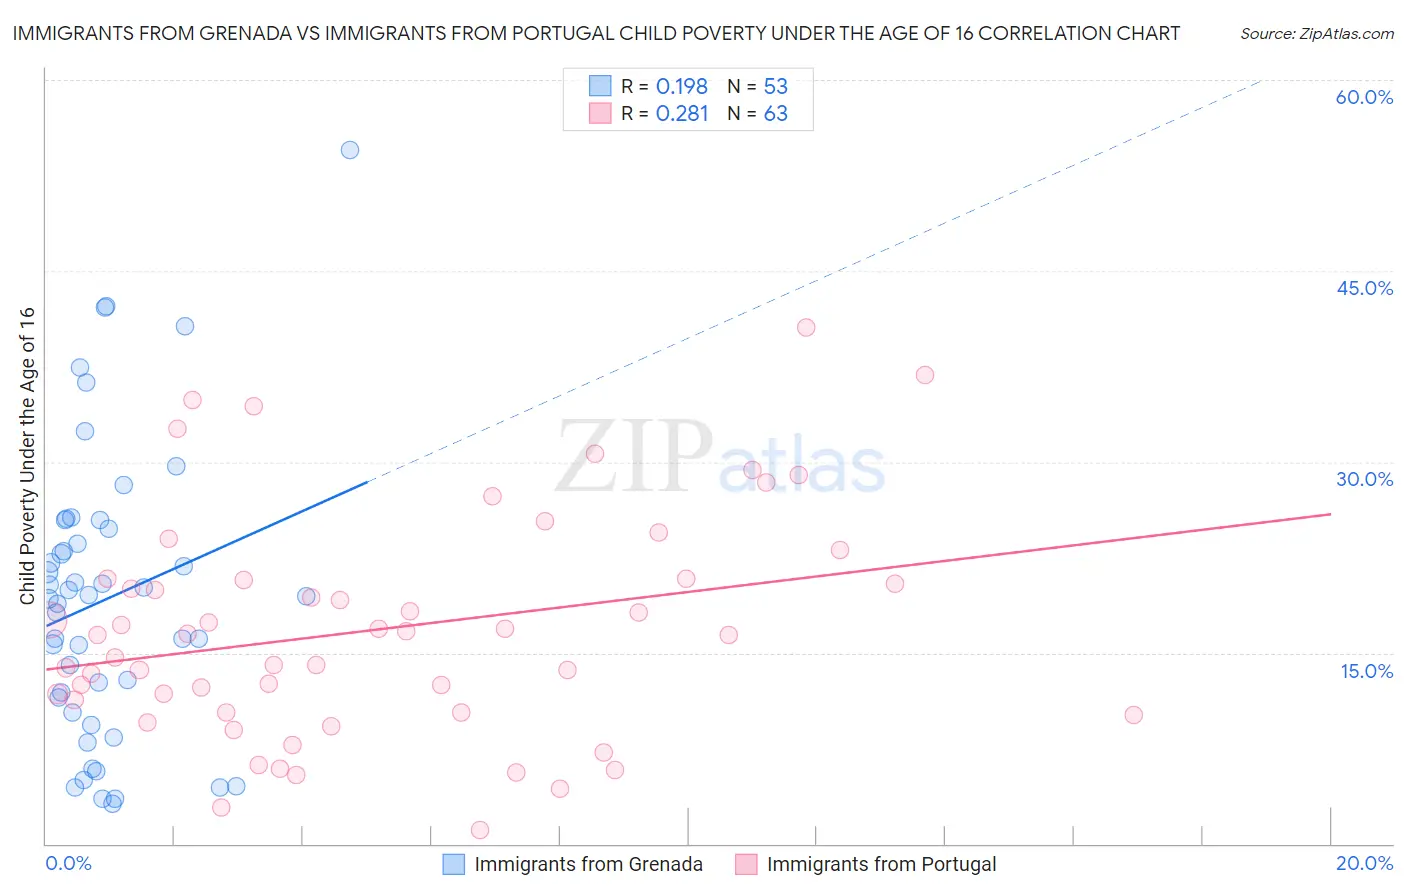 Immigrants from Grenada vs Immigrants from Portugal Child Poverty Under the Age of 16